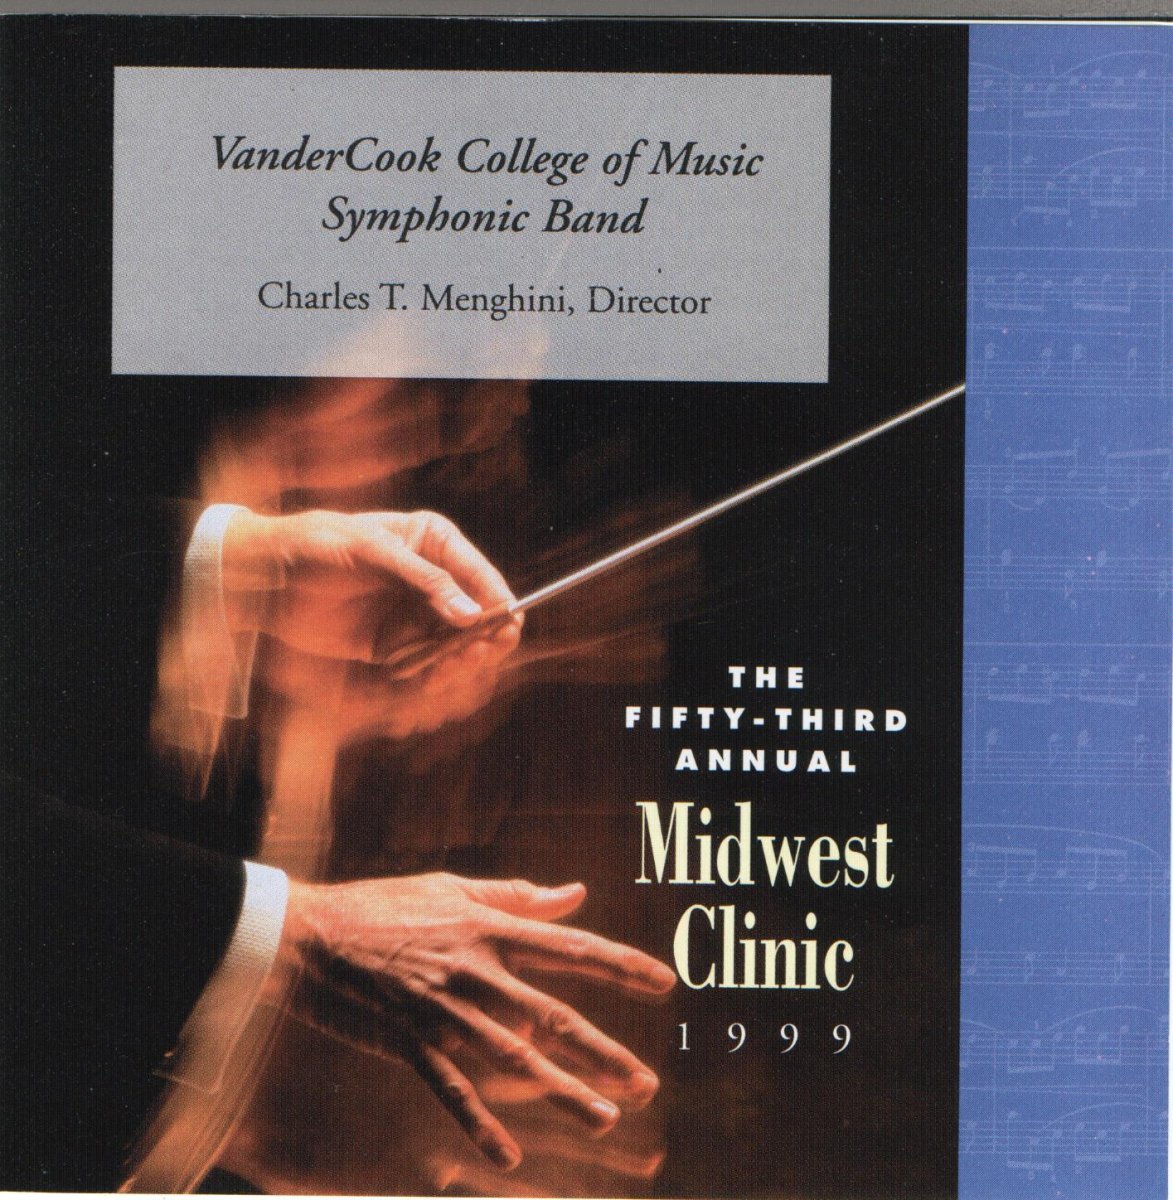 1999 Midwest Clinic: VanderCook College of Music Symphonic Band - click here